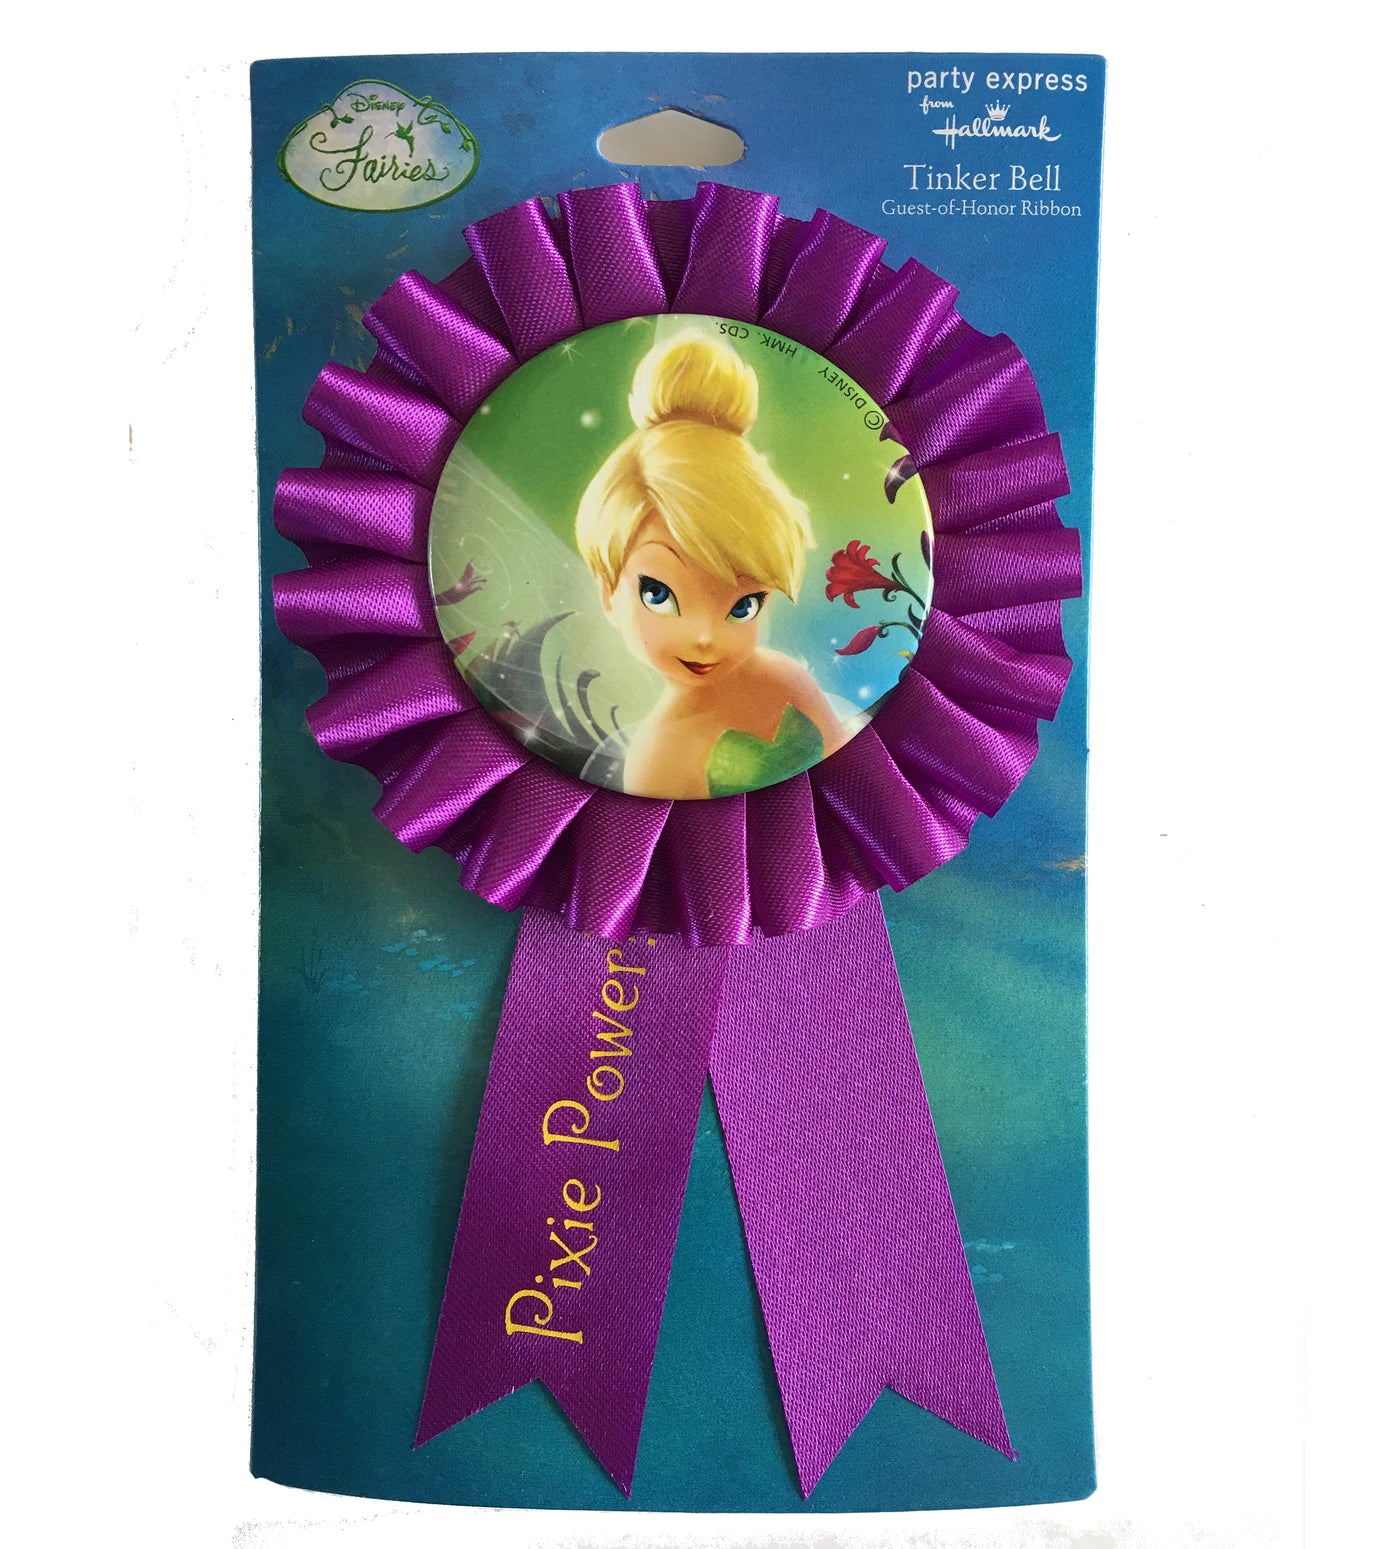 Winnie The Pooh Guest of Honor Ribbon